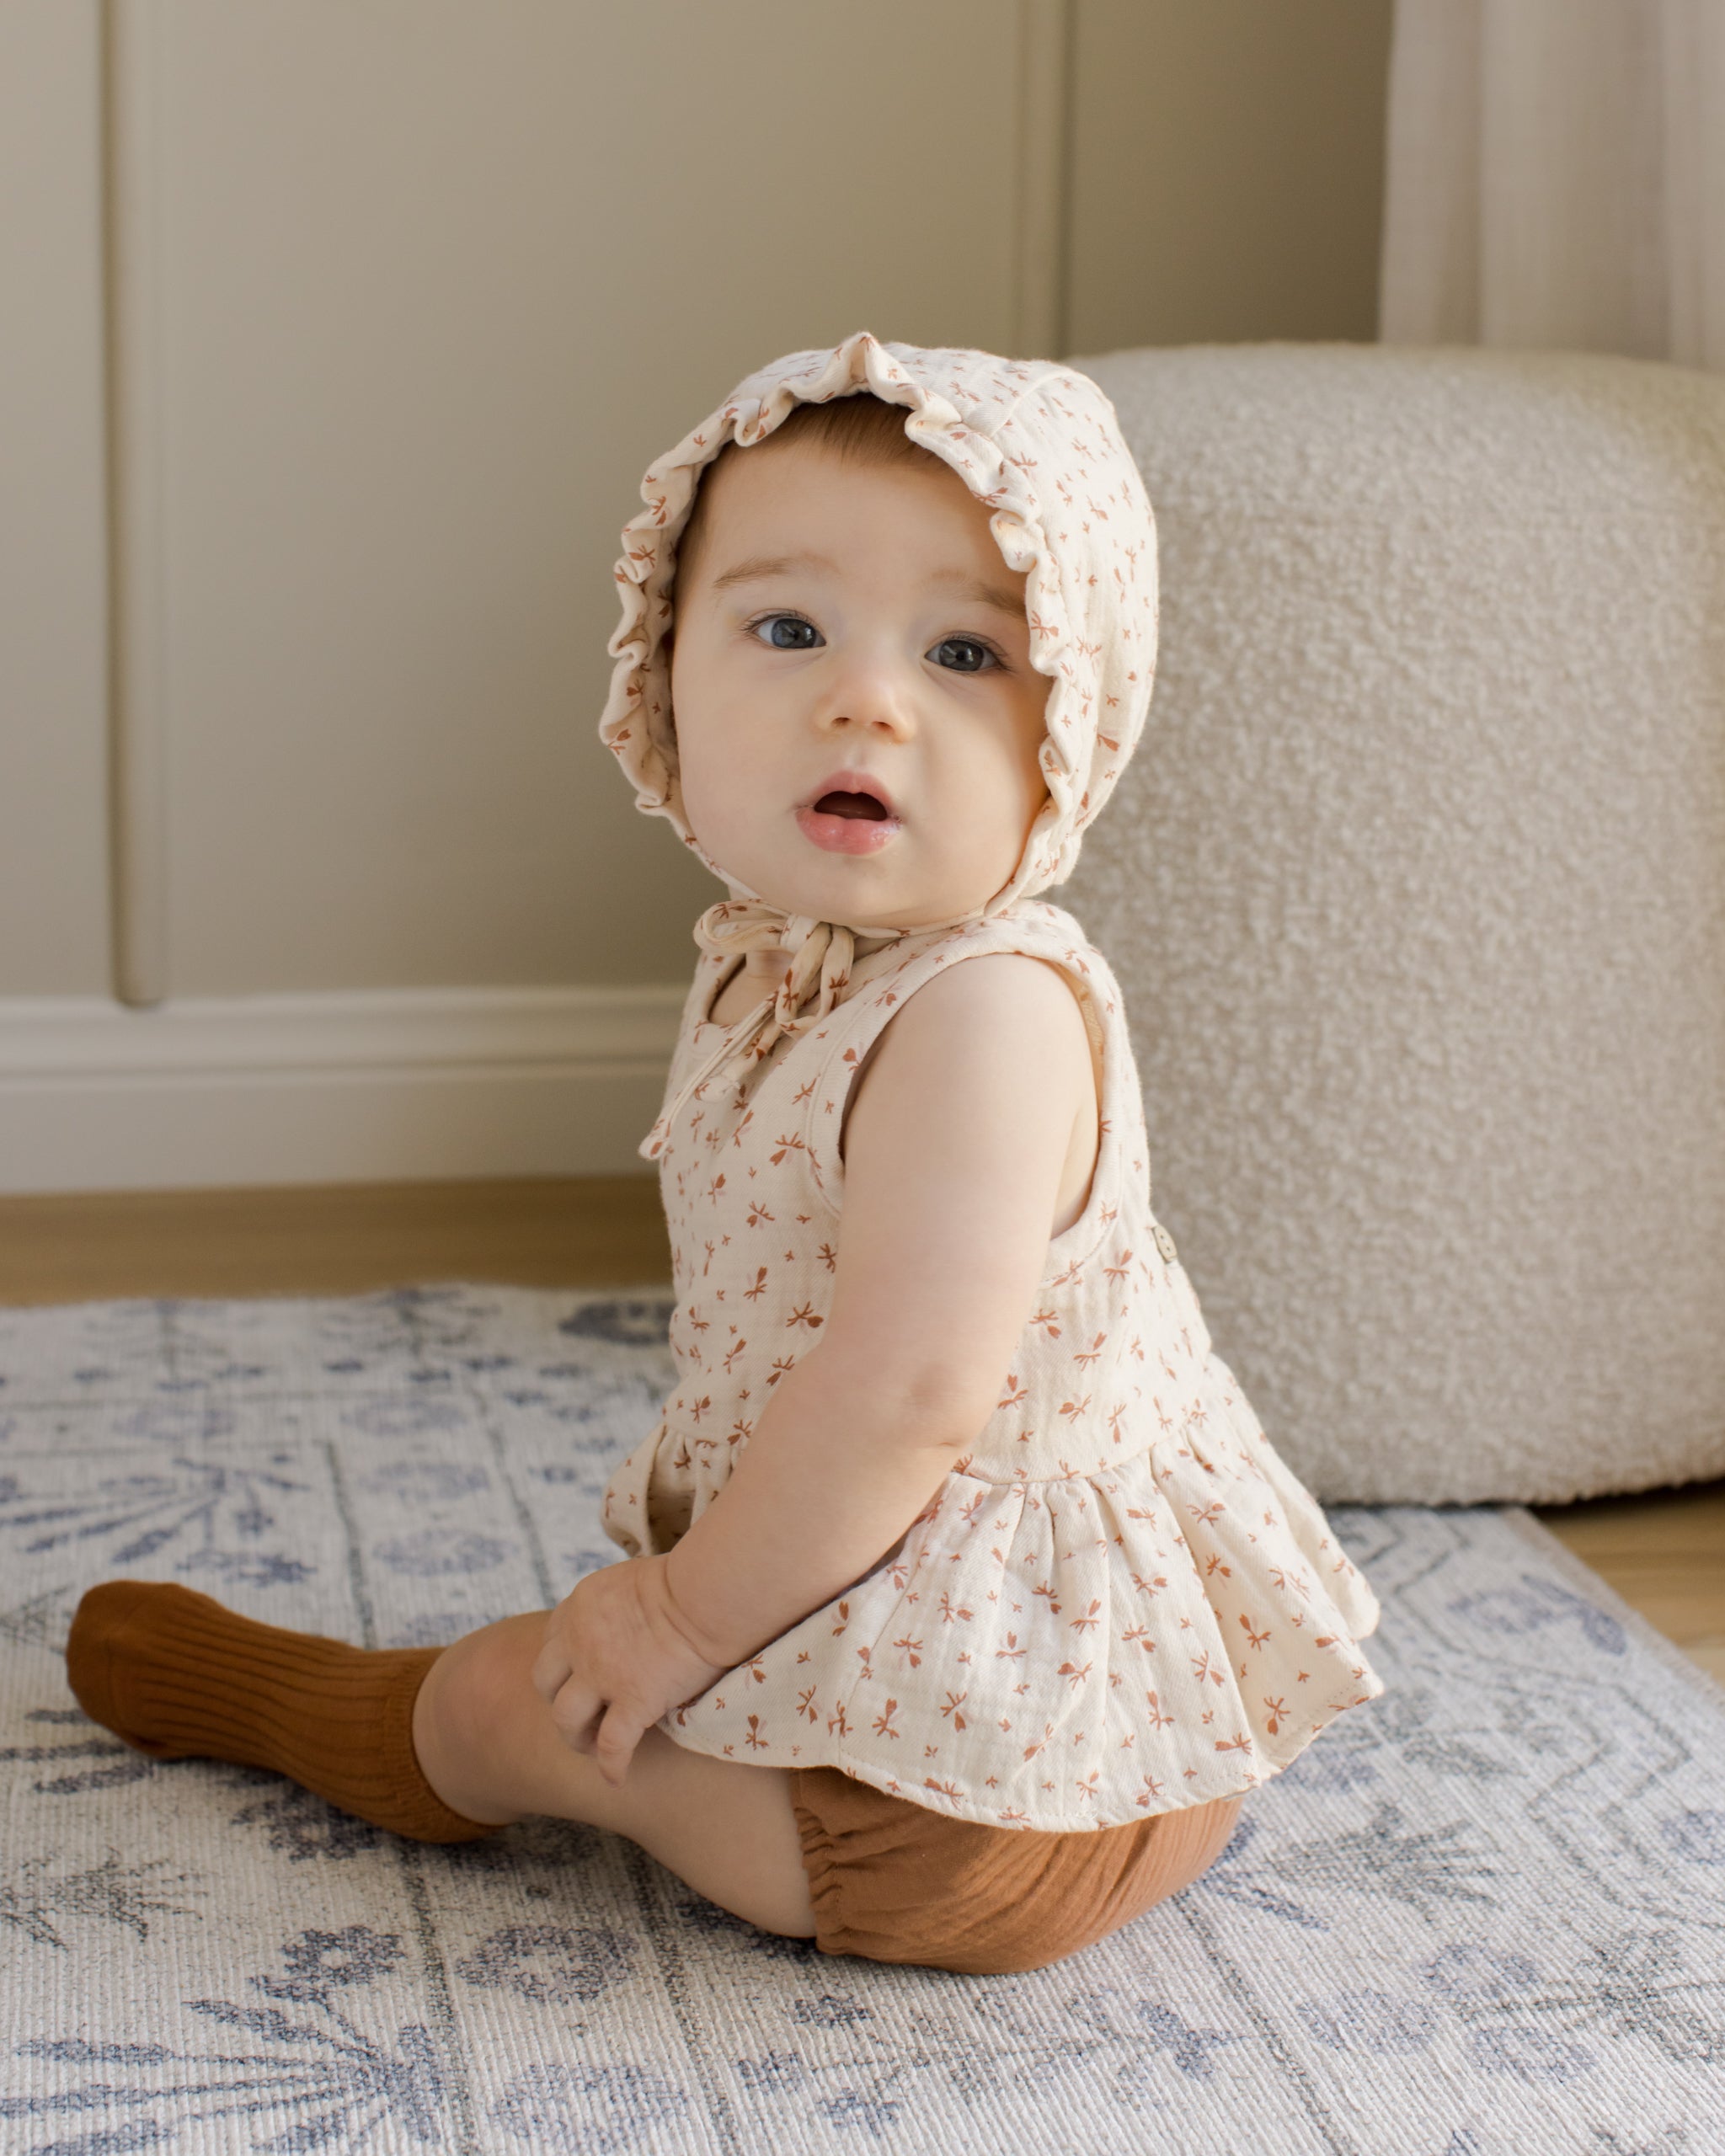 Woven Ruffle Bonnet || Clay Ditsy - Rylee + Cru | Kids Clothes | Trendy Baby Clothes | Modern Infant Outfits |